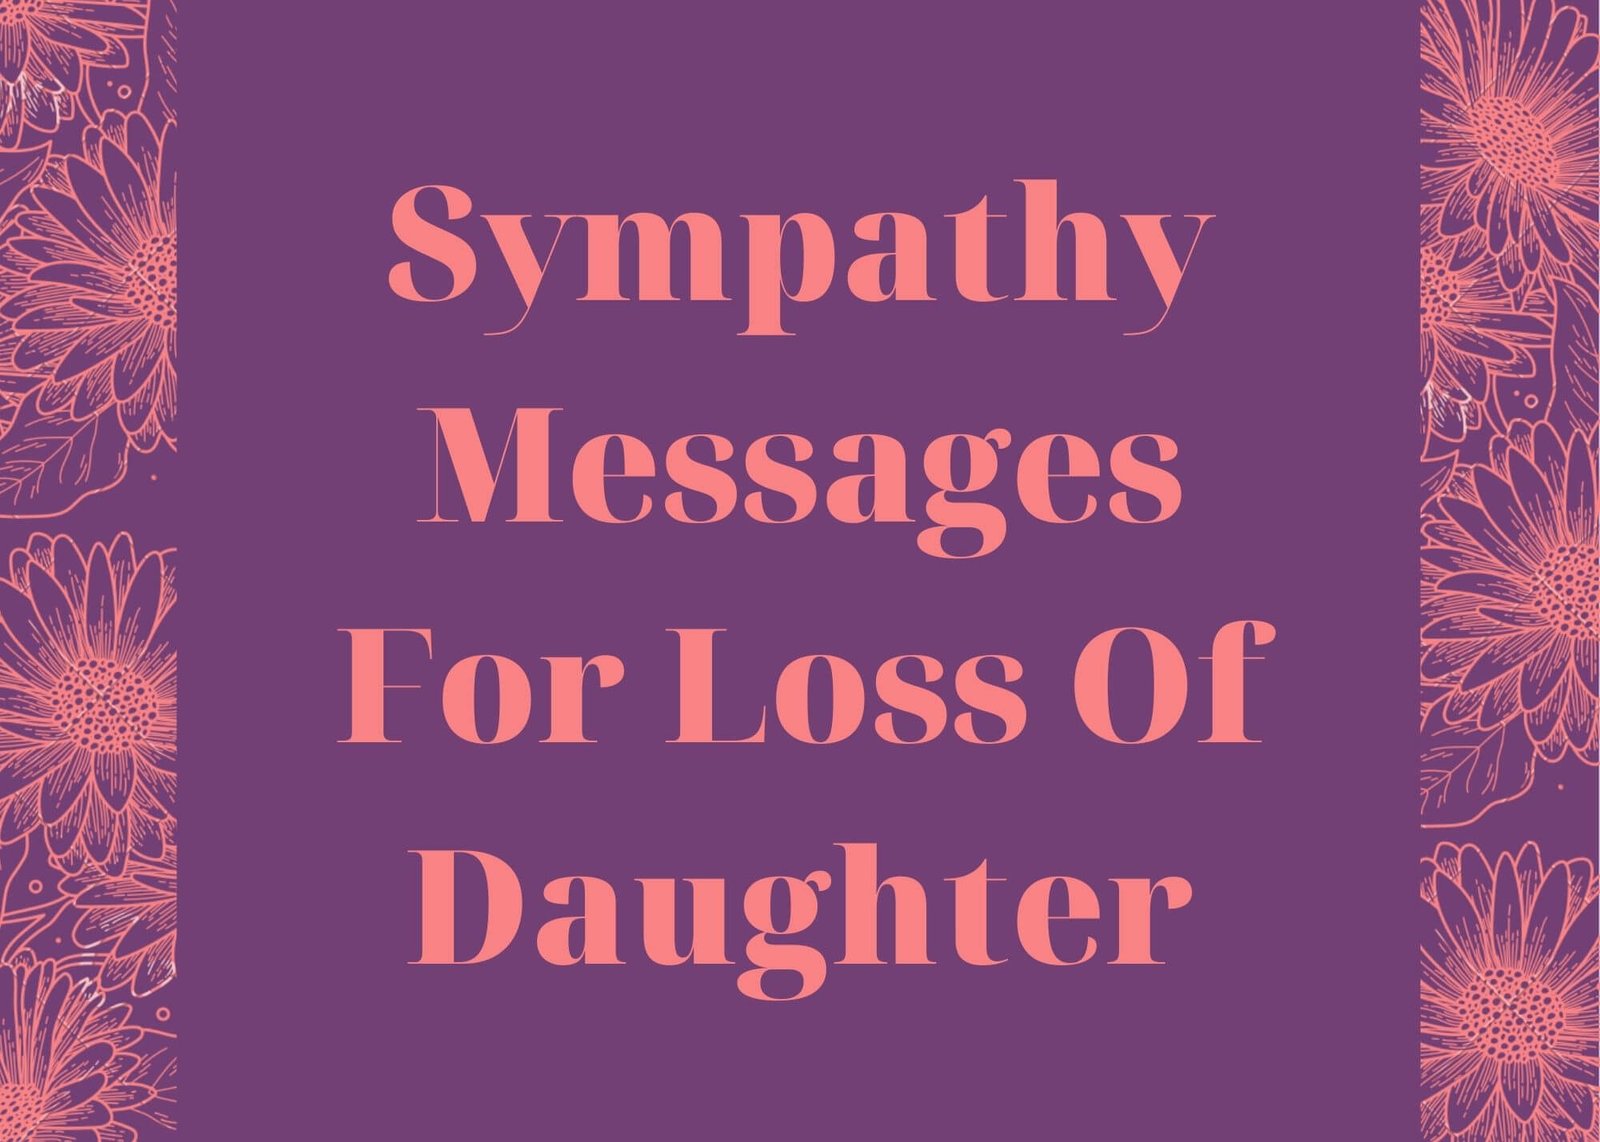 Sympathy Messages For Loss Of Daughter